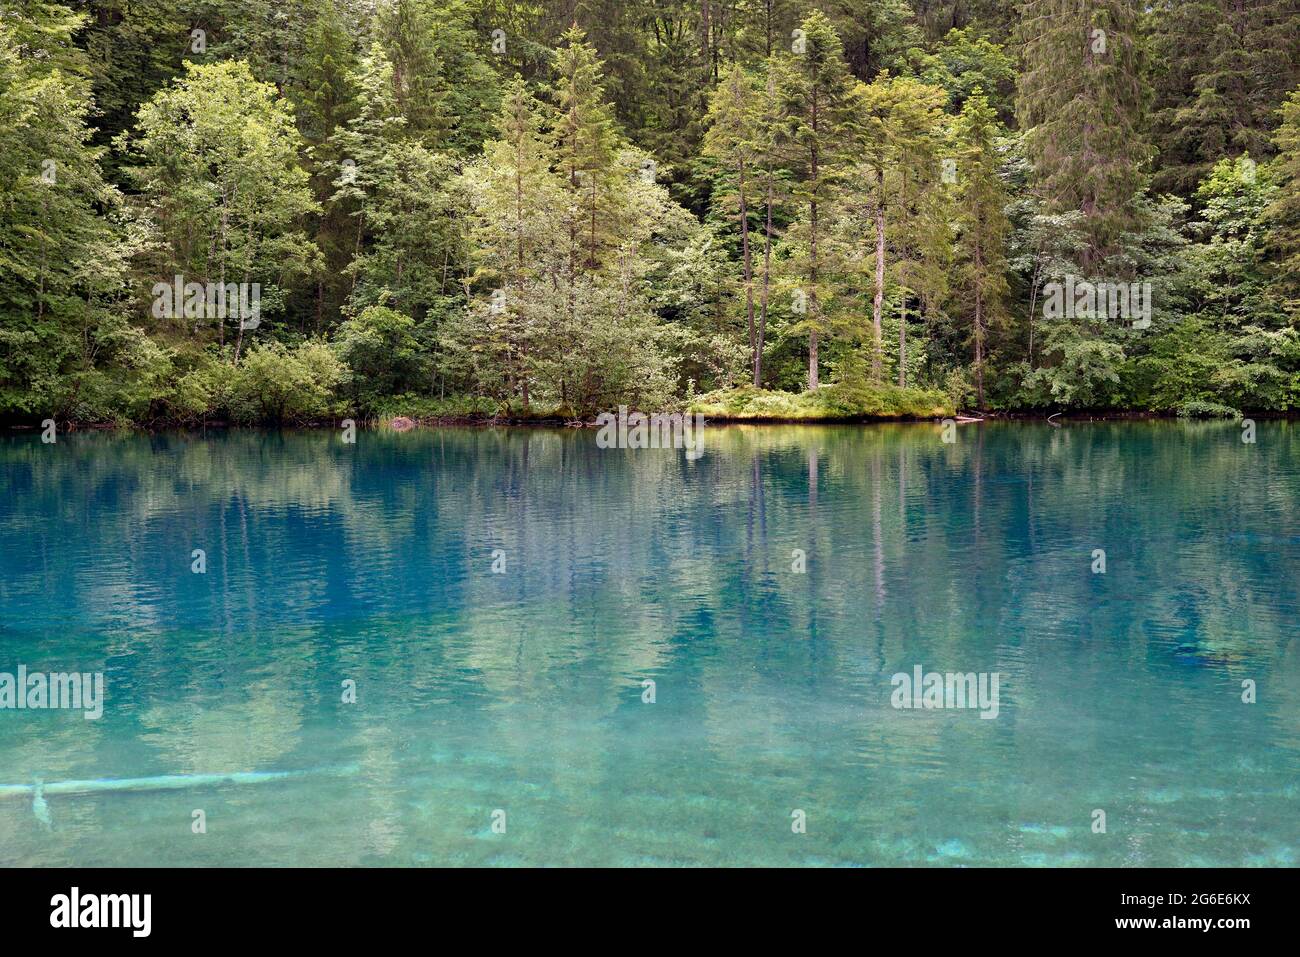 Mountain lake, Christlessee with clear turquoise water, tree trunks at the bottom of the lake, Trettachtal, Allgaeu Alps, Allgaeu, Bavaria, Germany Stock Photo